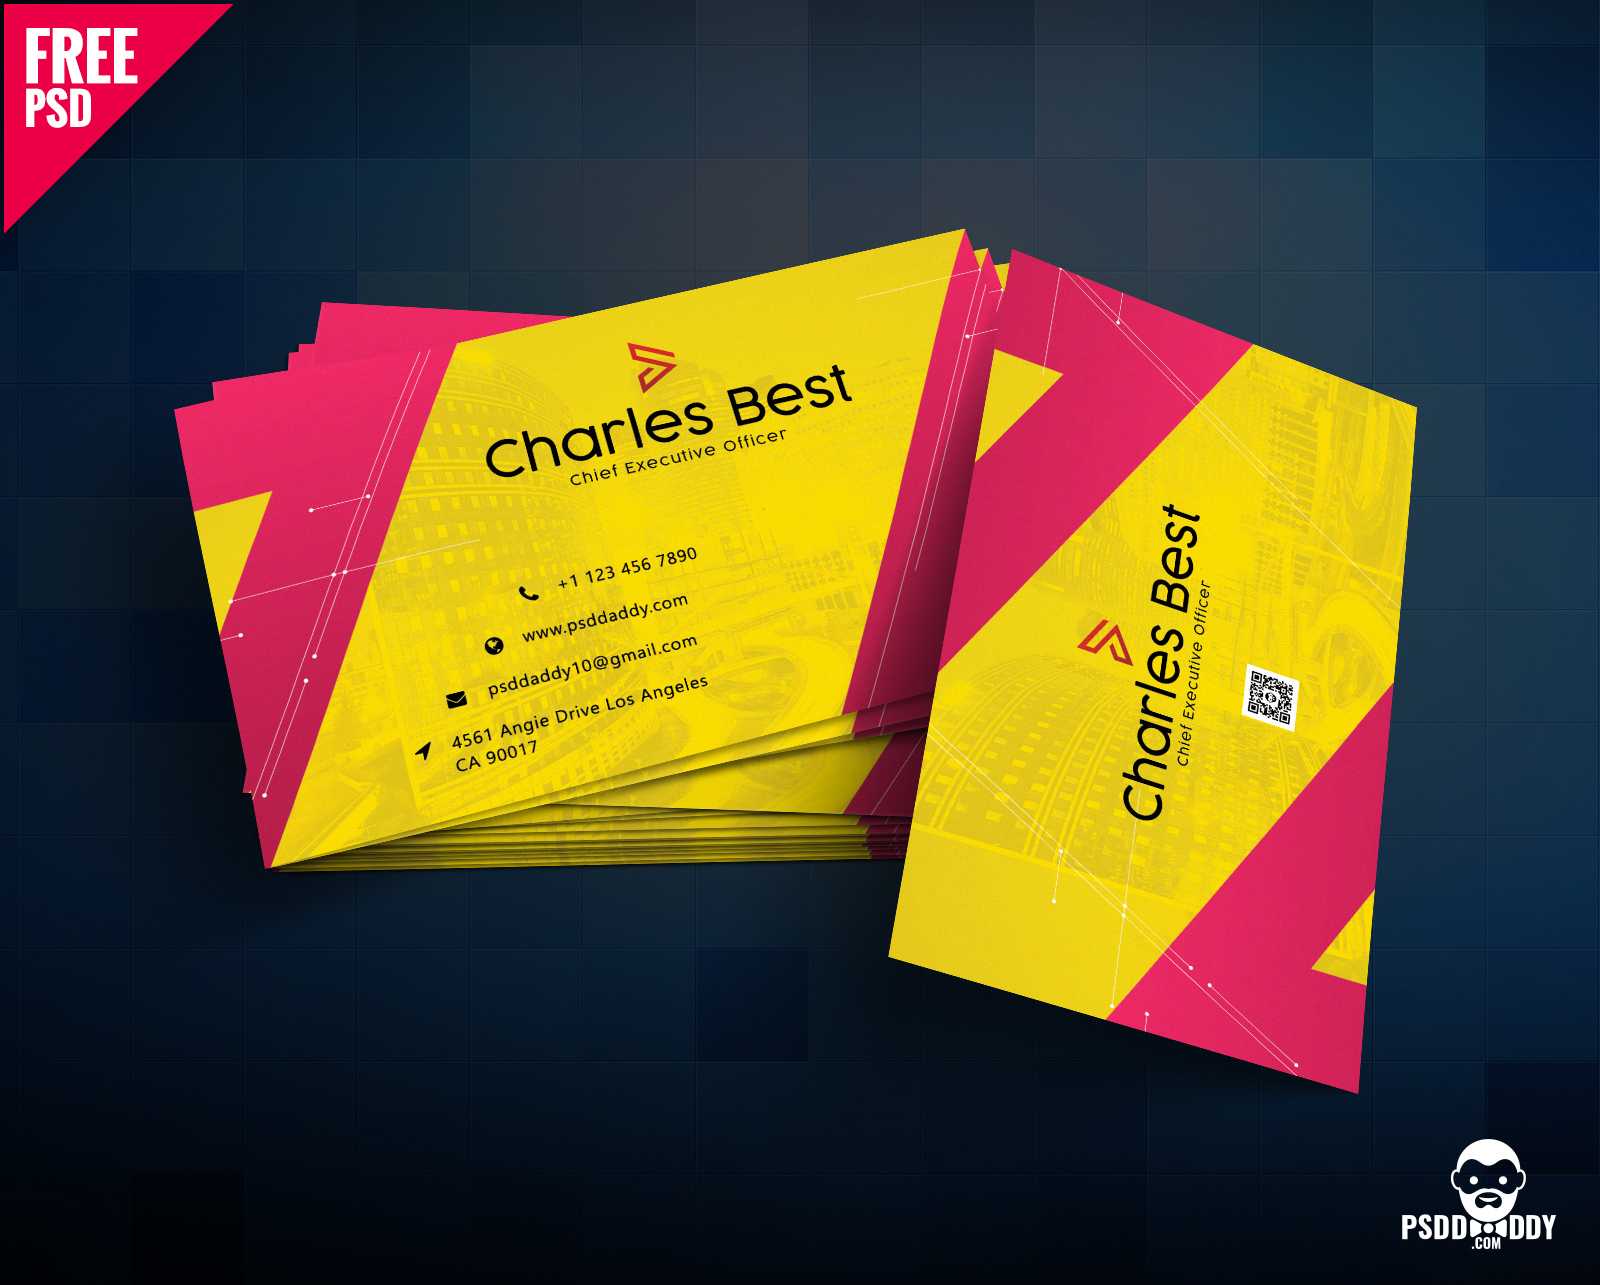 Download] Creative Business Card Free Psd | Psddaddy Throughout Iphone Business Card Template